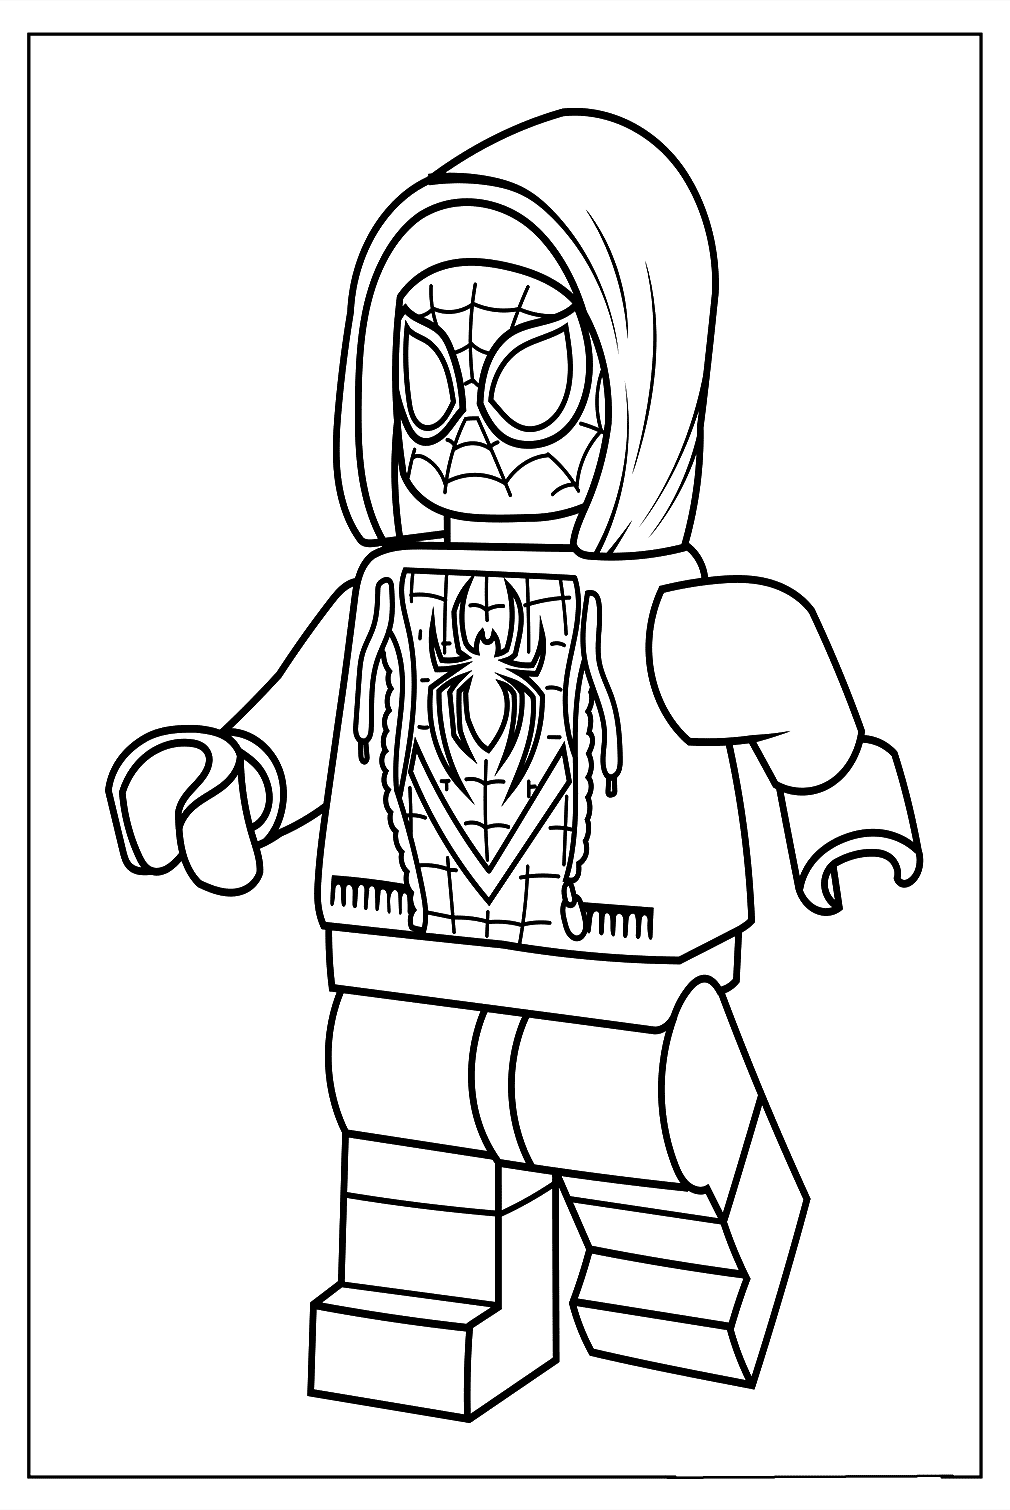 Lego Miles Morales Spider Man Coloring Page from Spider-Man: Across the Spider